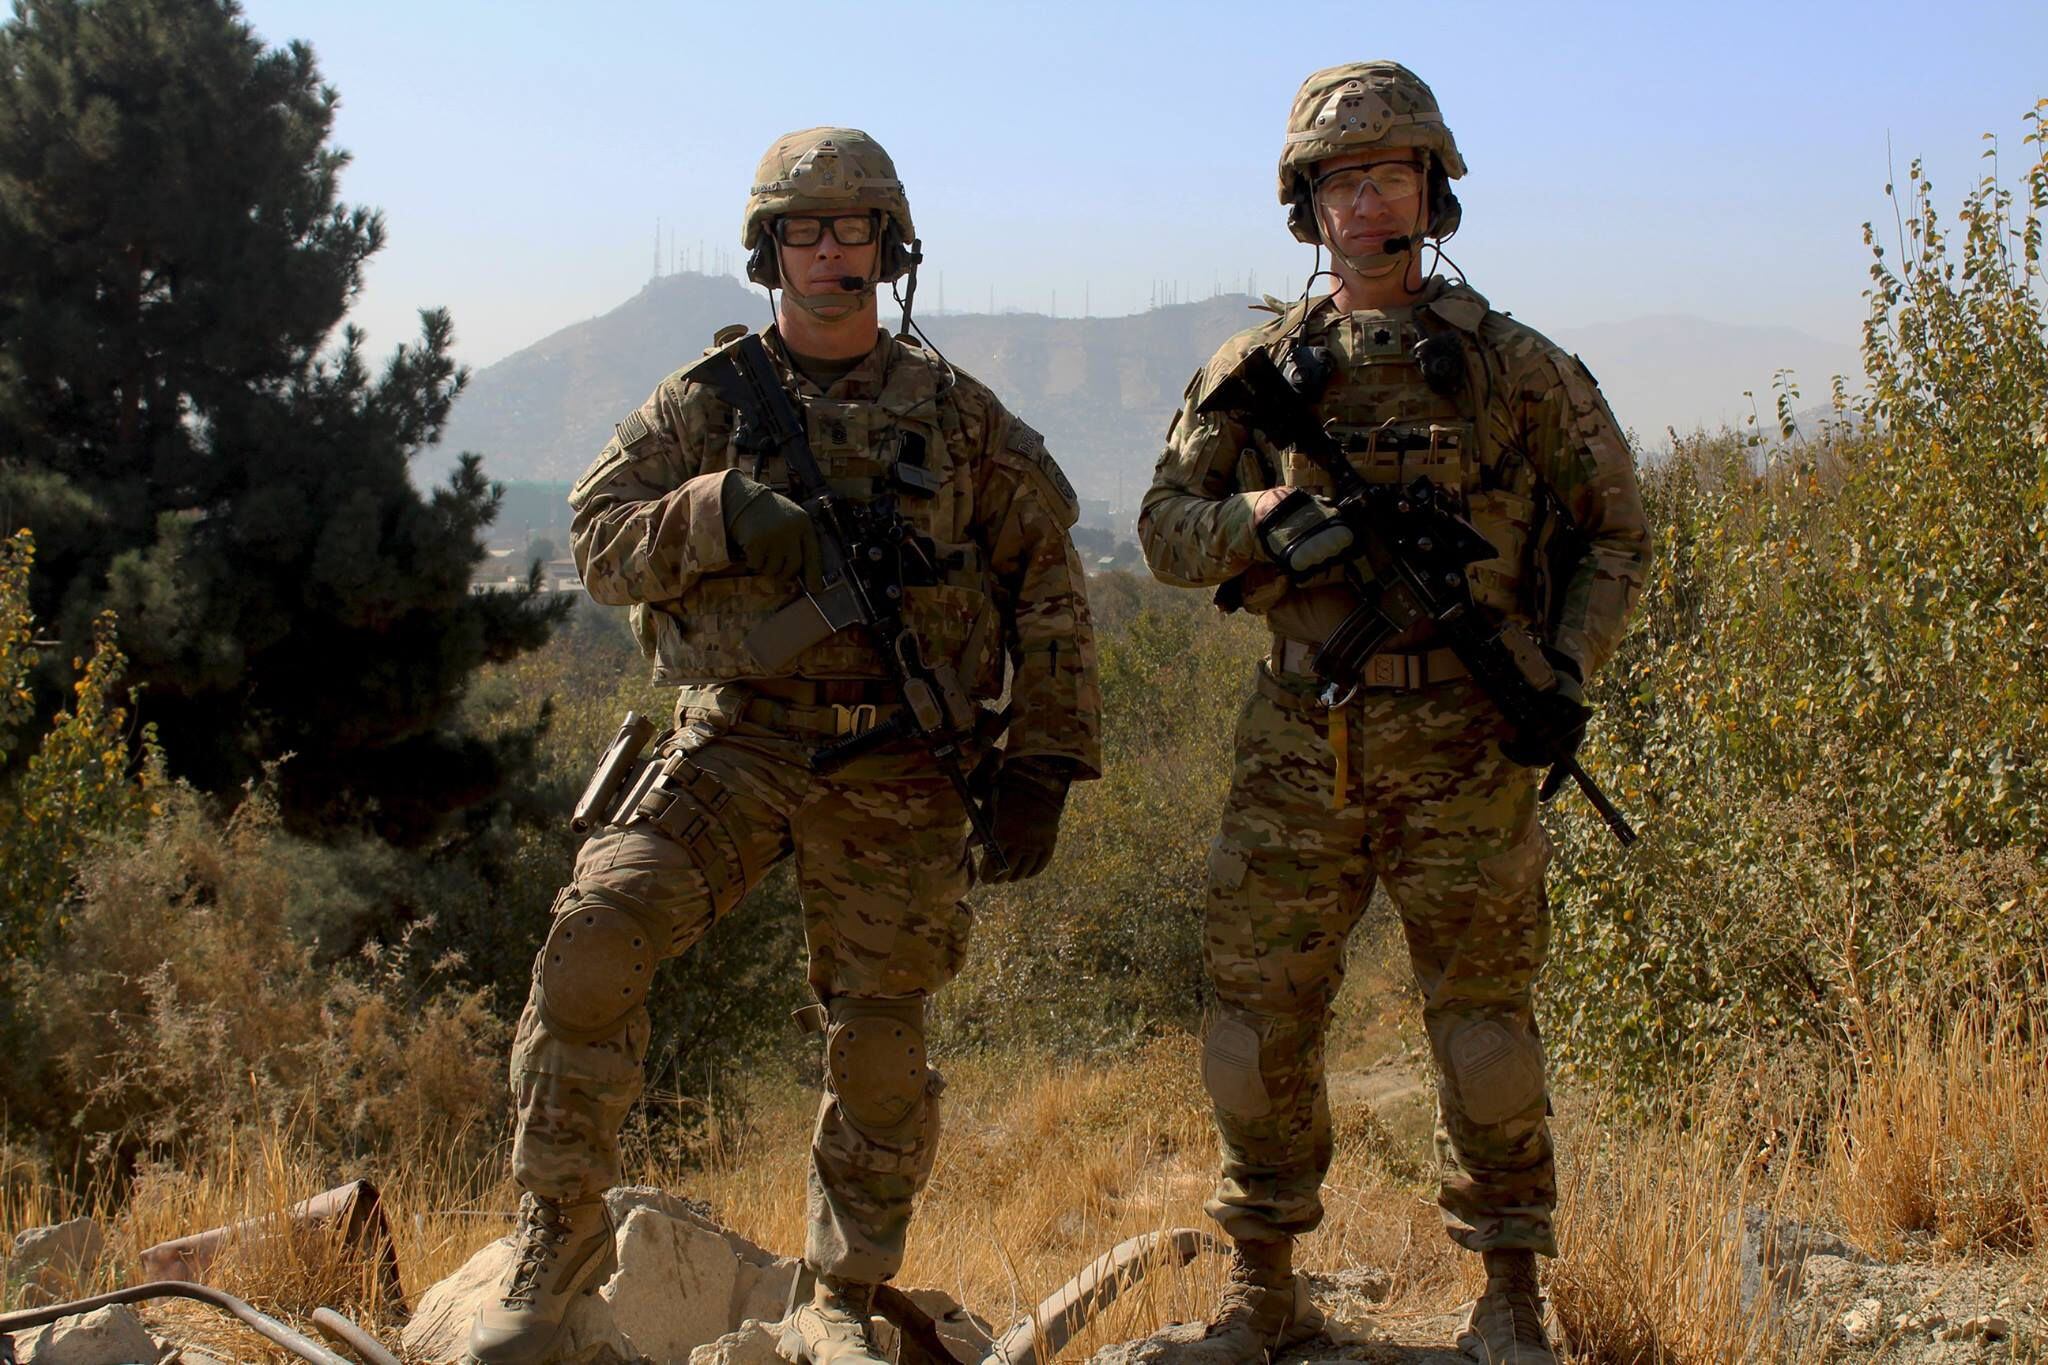 Former Command Sgt. Maj. Clinton Murray (left) during a 2017 deployment to Afghanistan. Murray was demoted to master sergeant after a jury convicted him of having an inappropriate relationship with a private first class during this deployment. (U.S. Army)